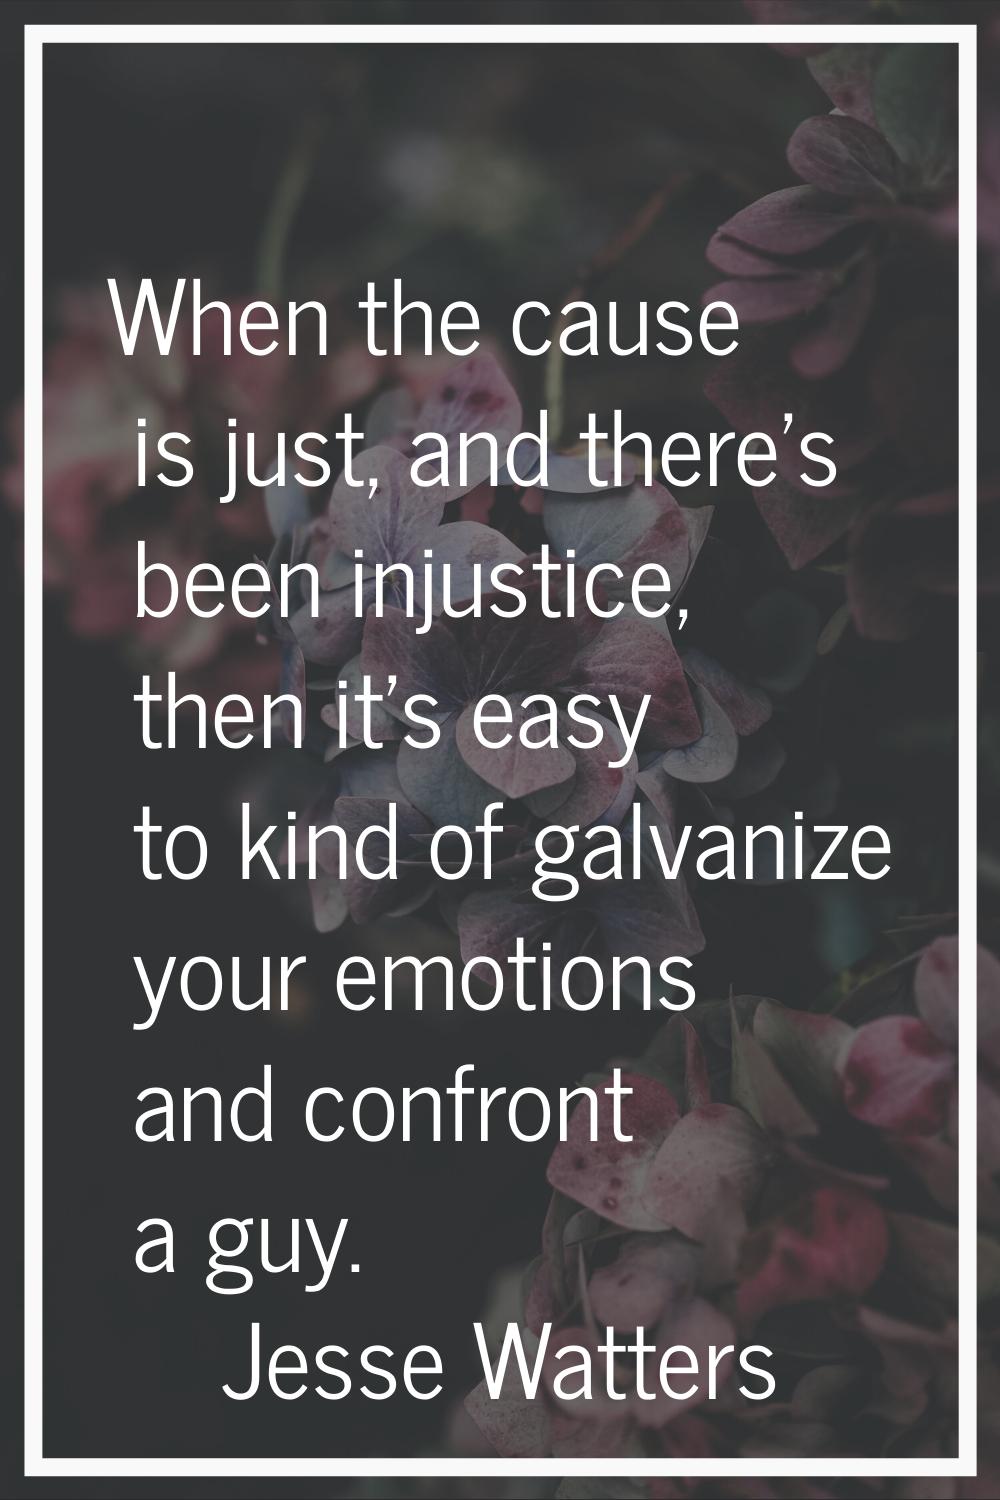 When the cause is just, and there's been injustice, then it's easy to kind of galvanize your emotio